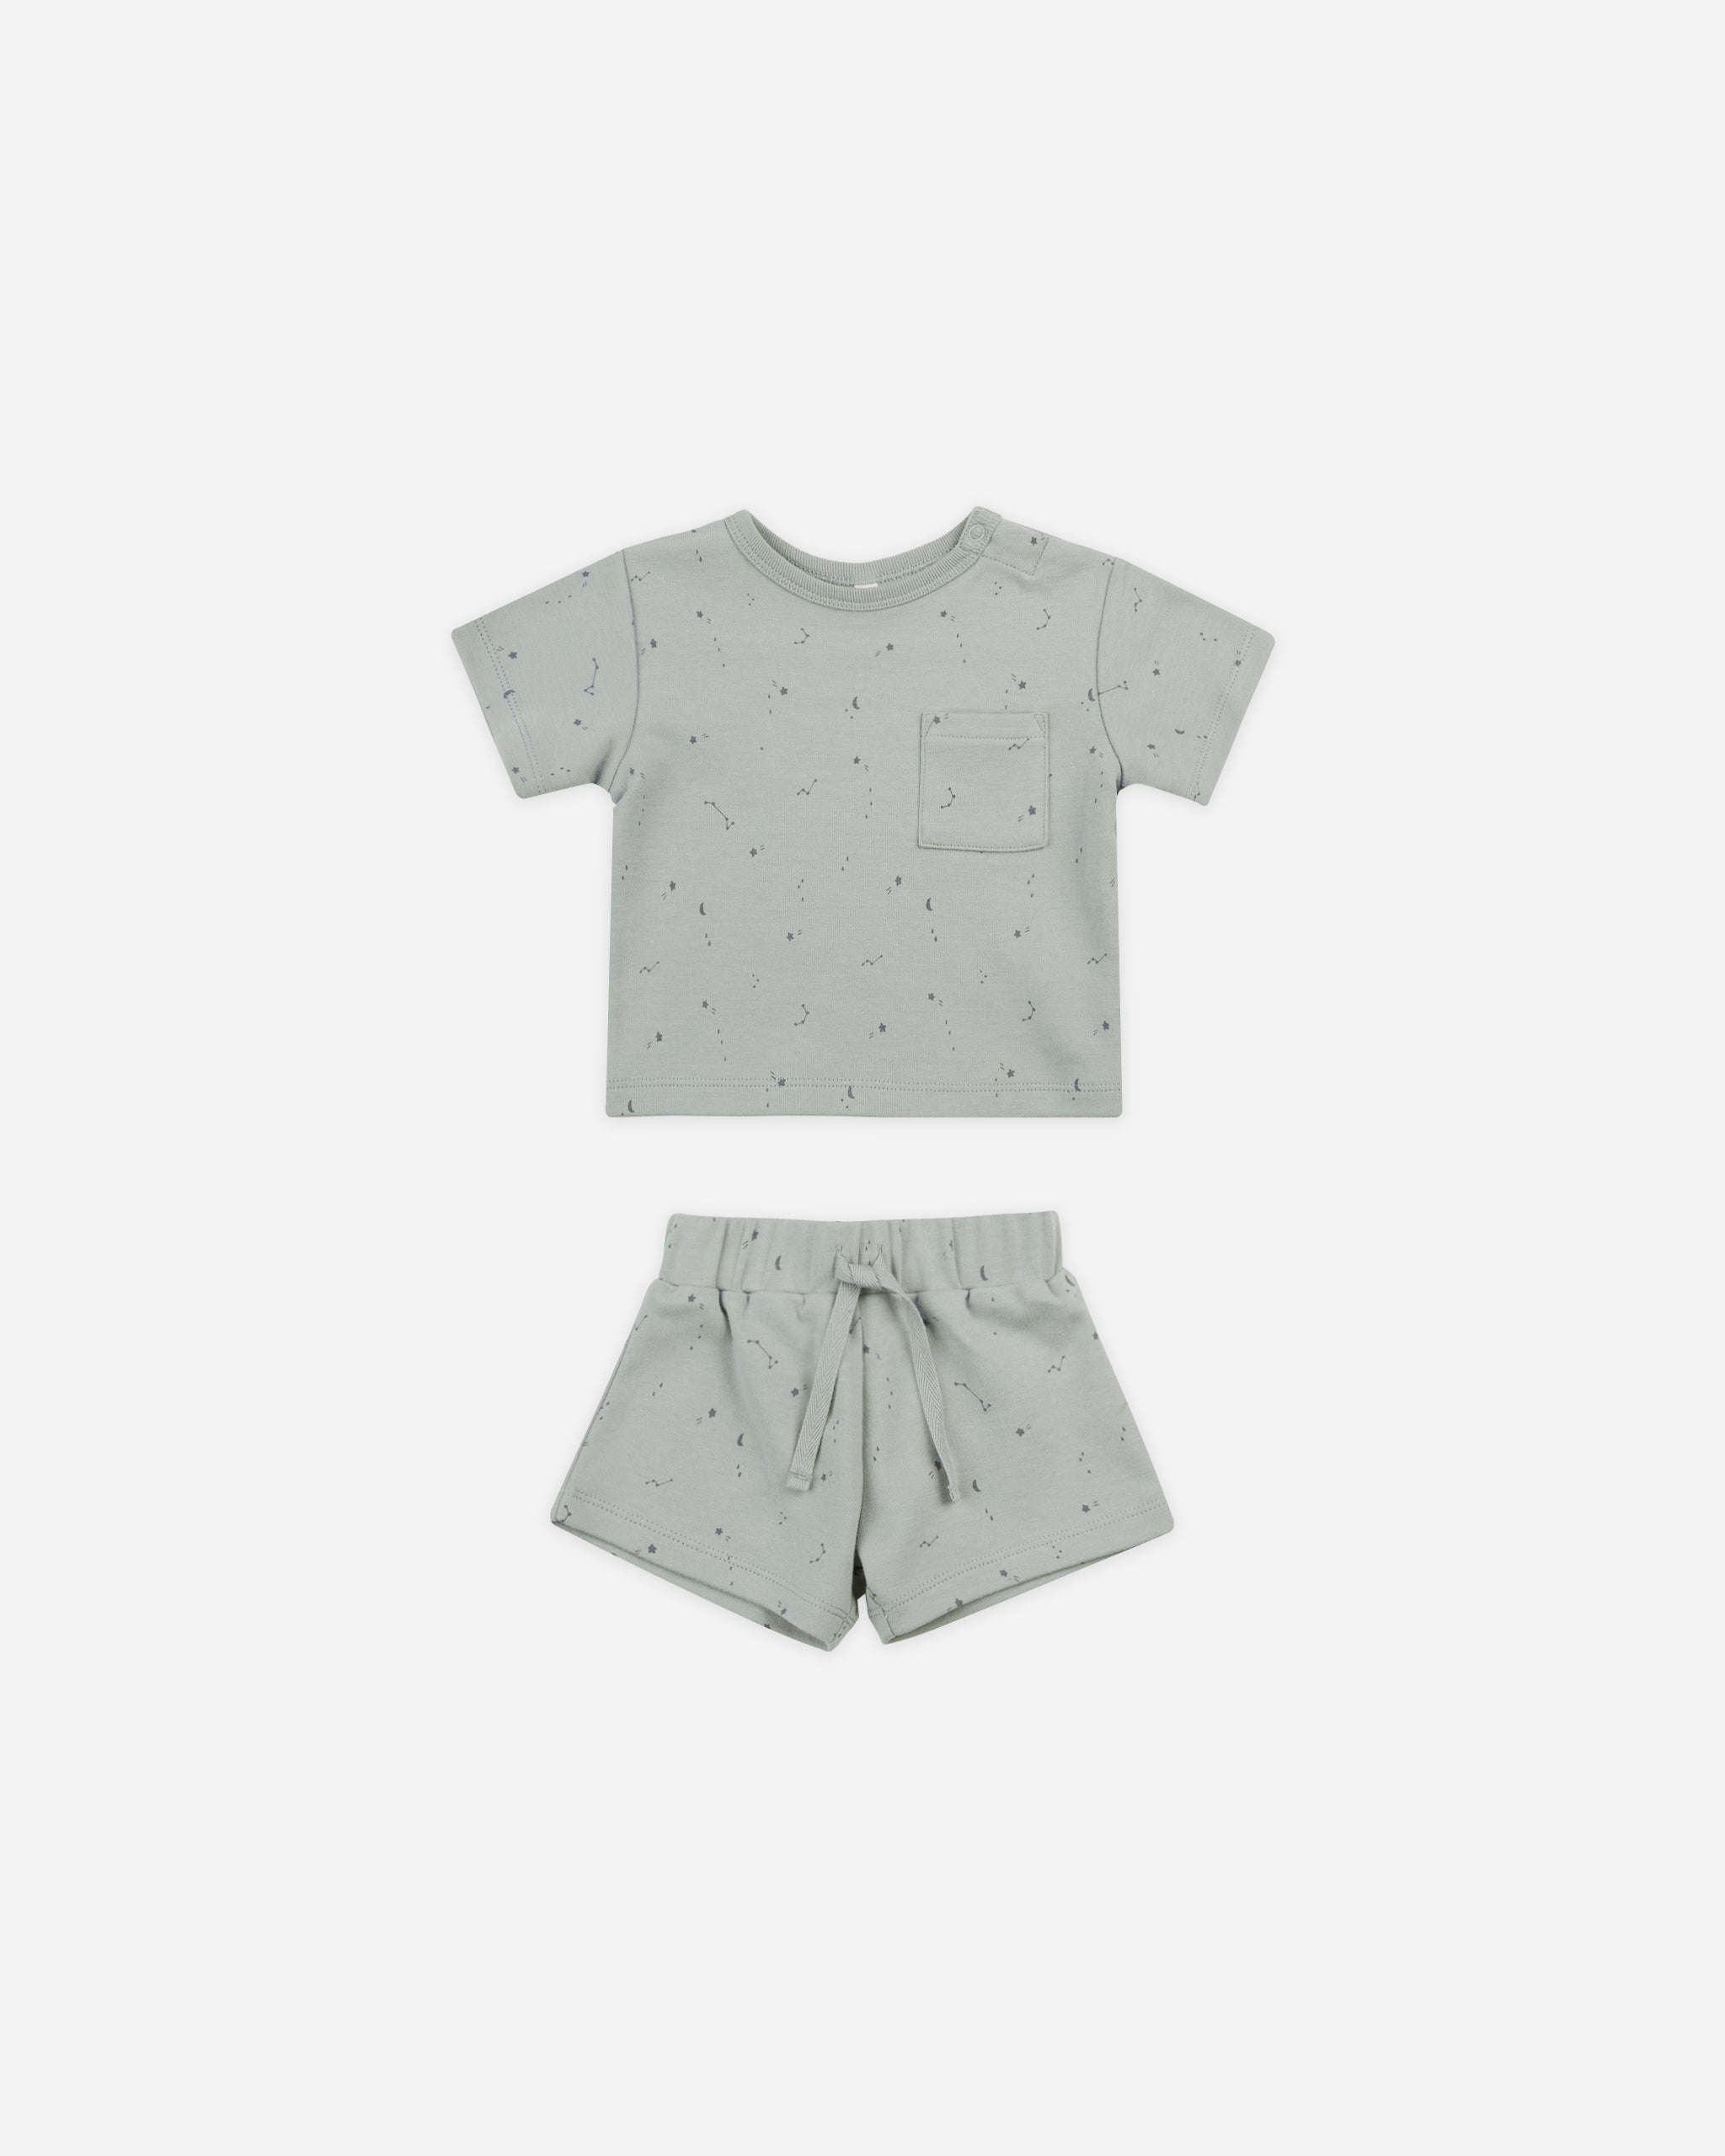 Boxy Pocket Tee + Short Set || Constellations - Rylee + Cru | Kids Clothes | Trendy Baby Clothes | Modern Infant Outfits |